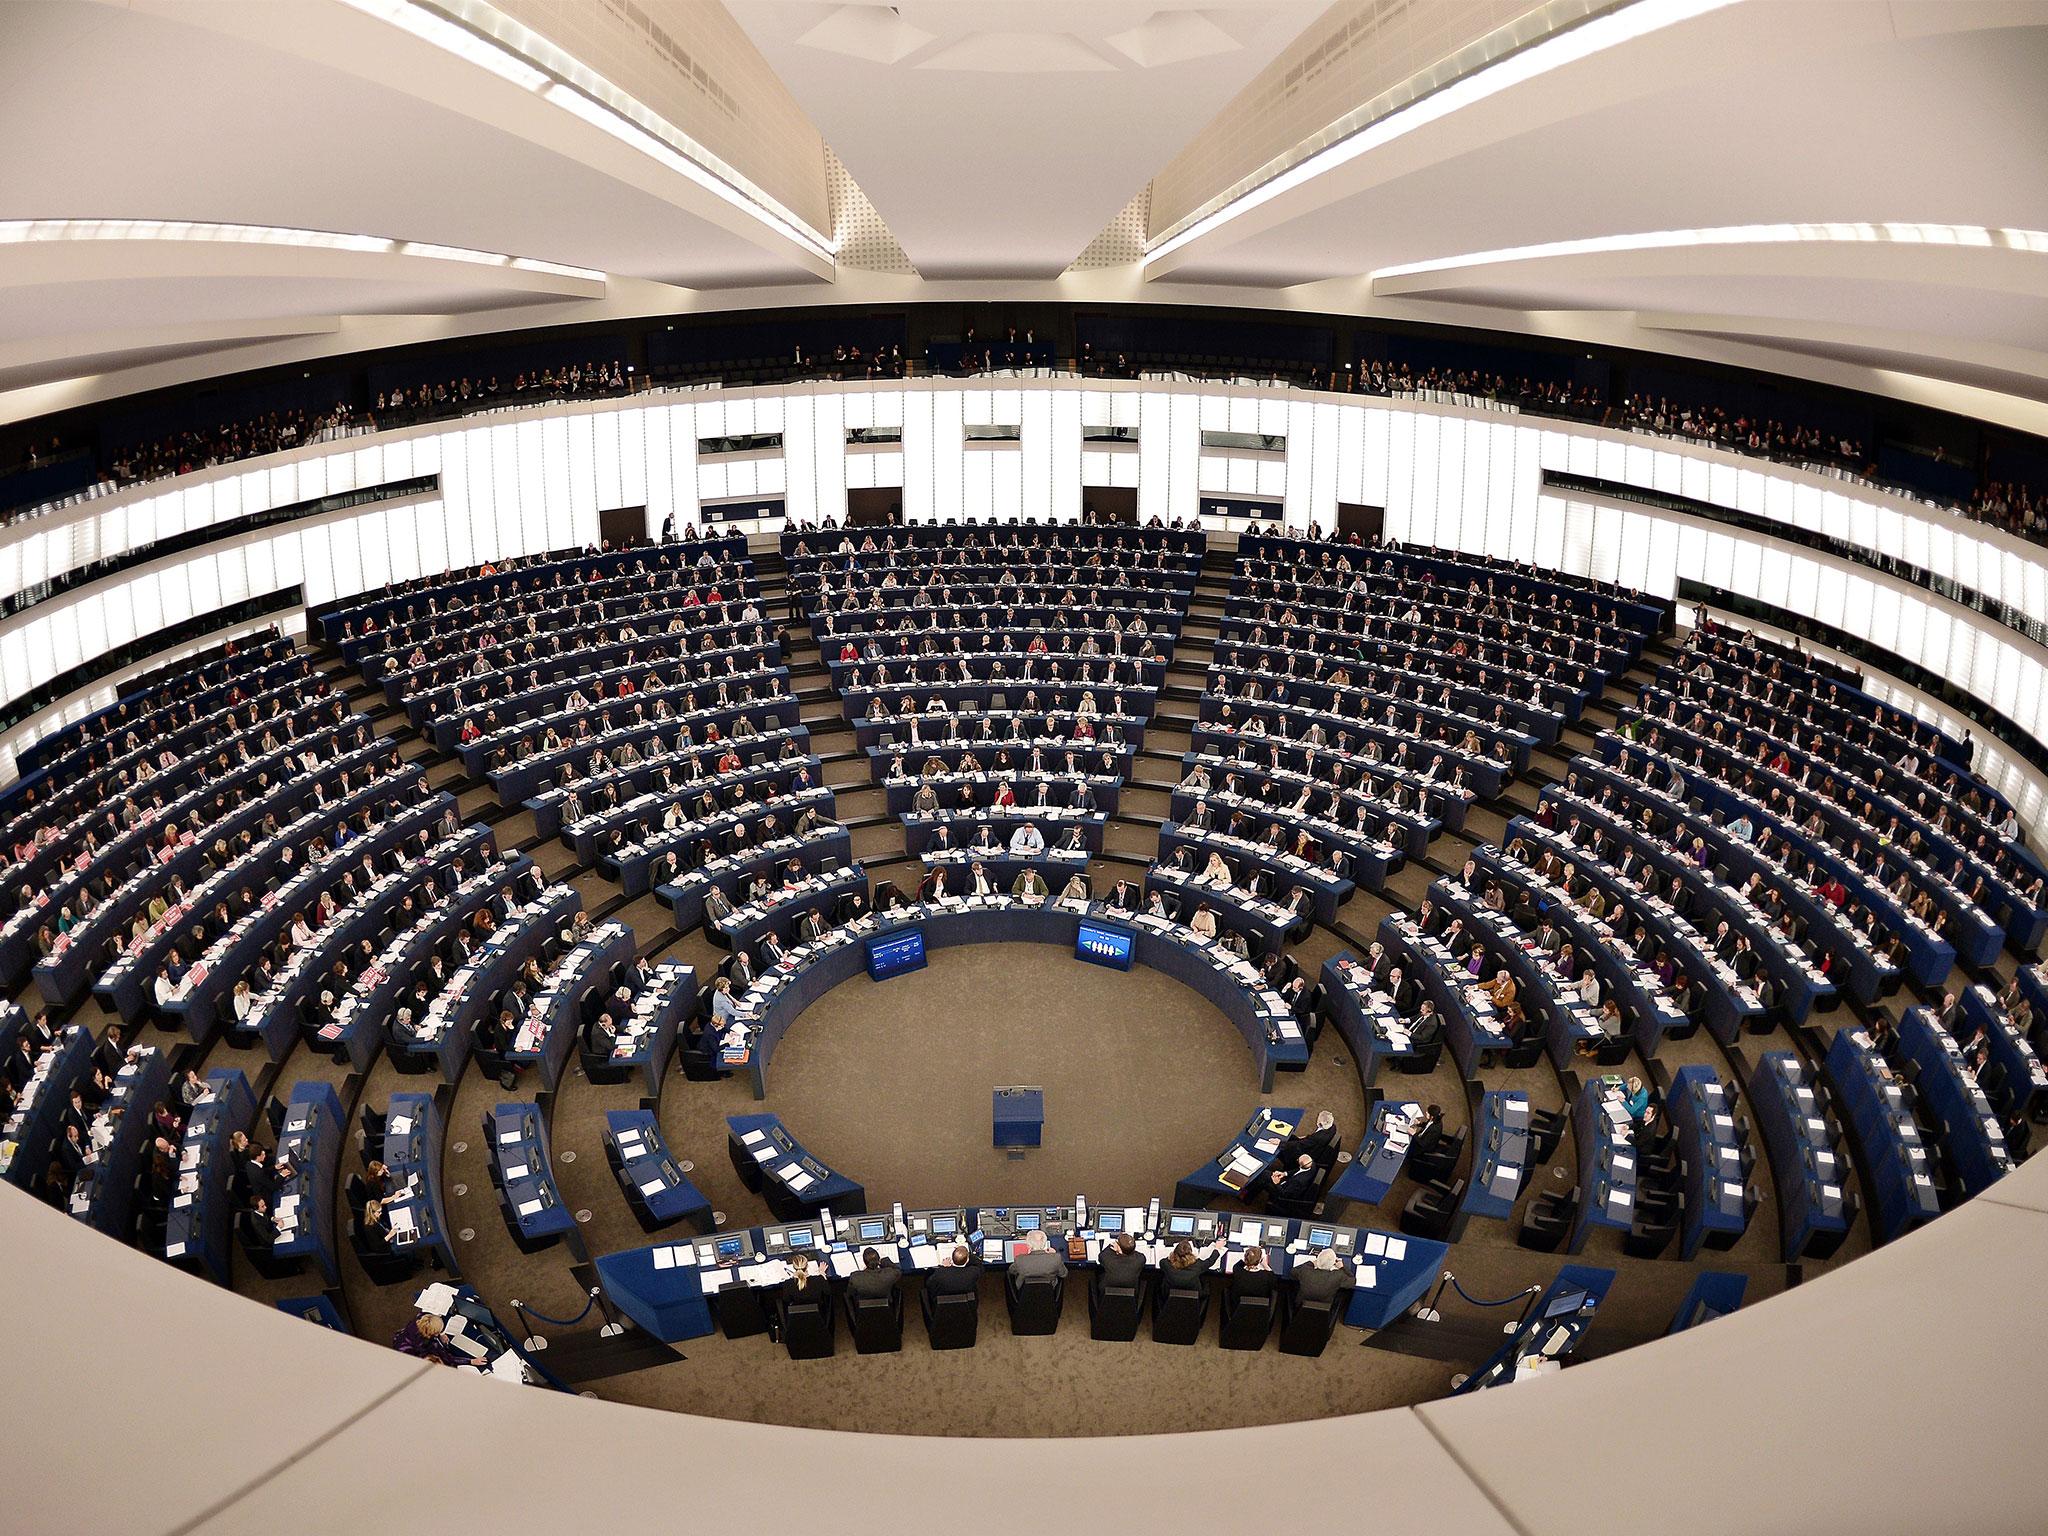 Members of the European Parliament take part in a voting session on November 27, 2014, in the European Parliament in Strasbourg, eastern France